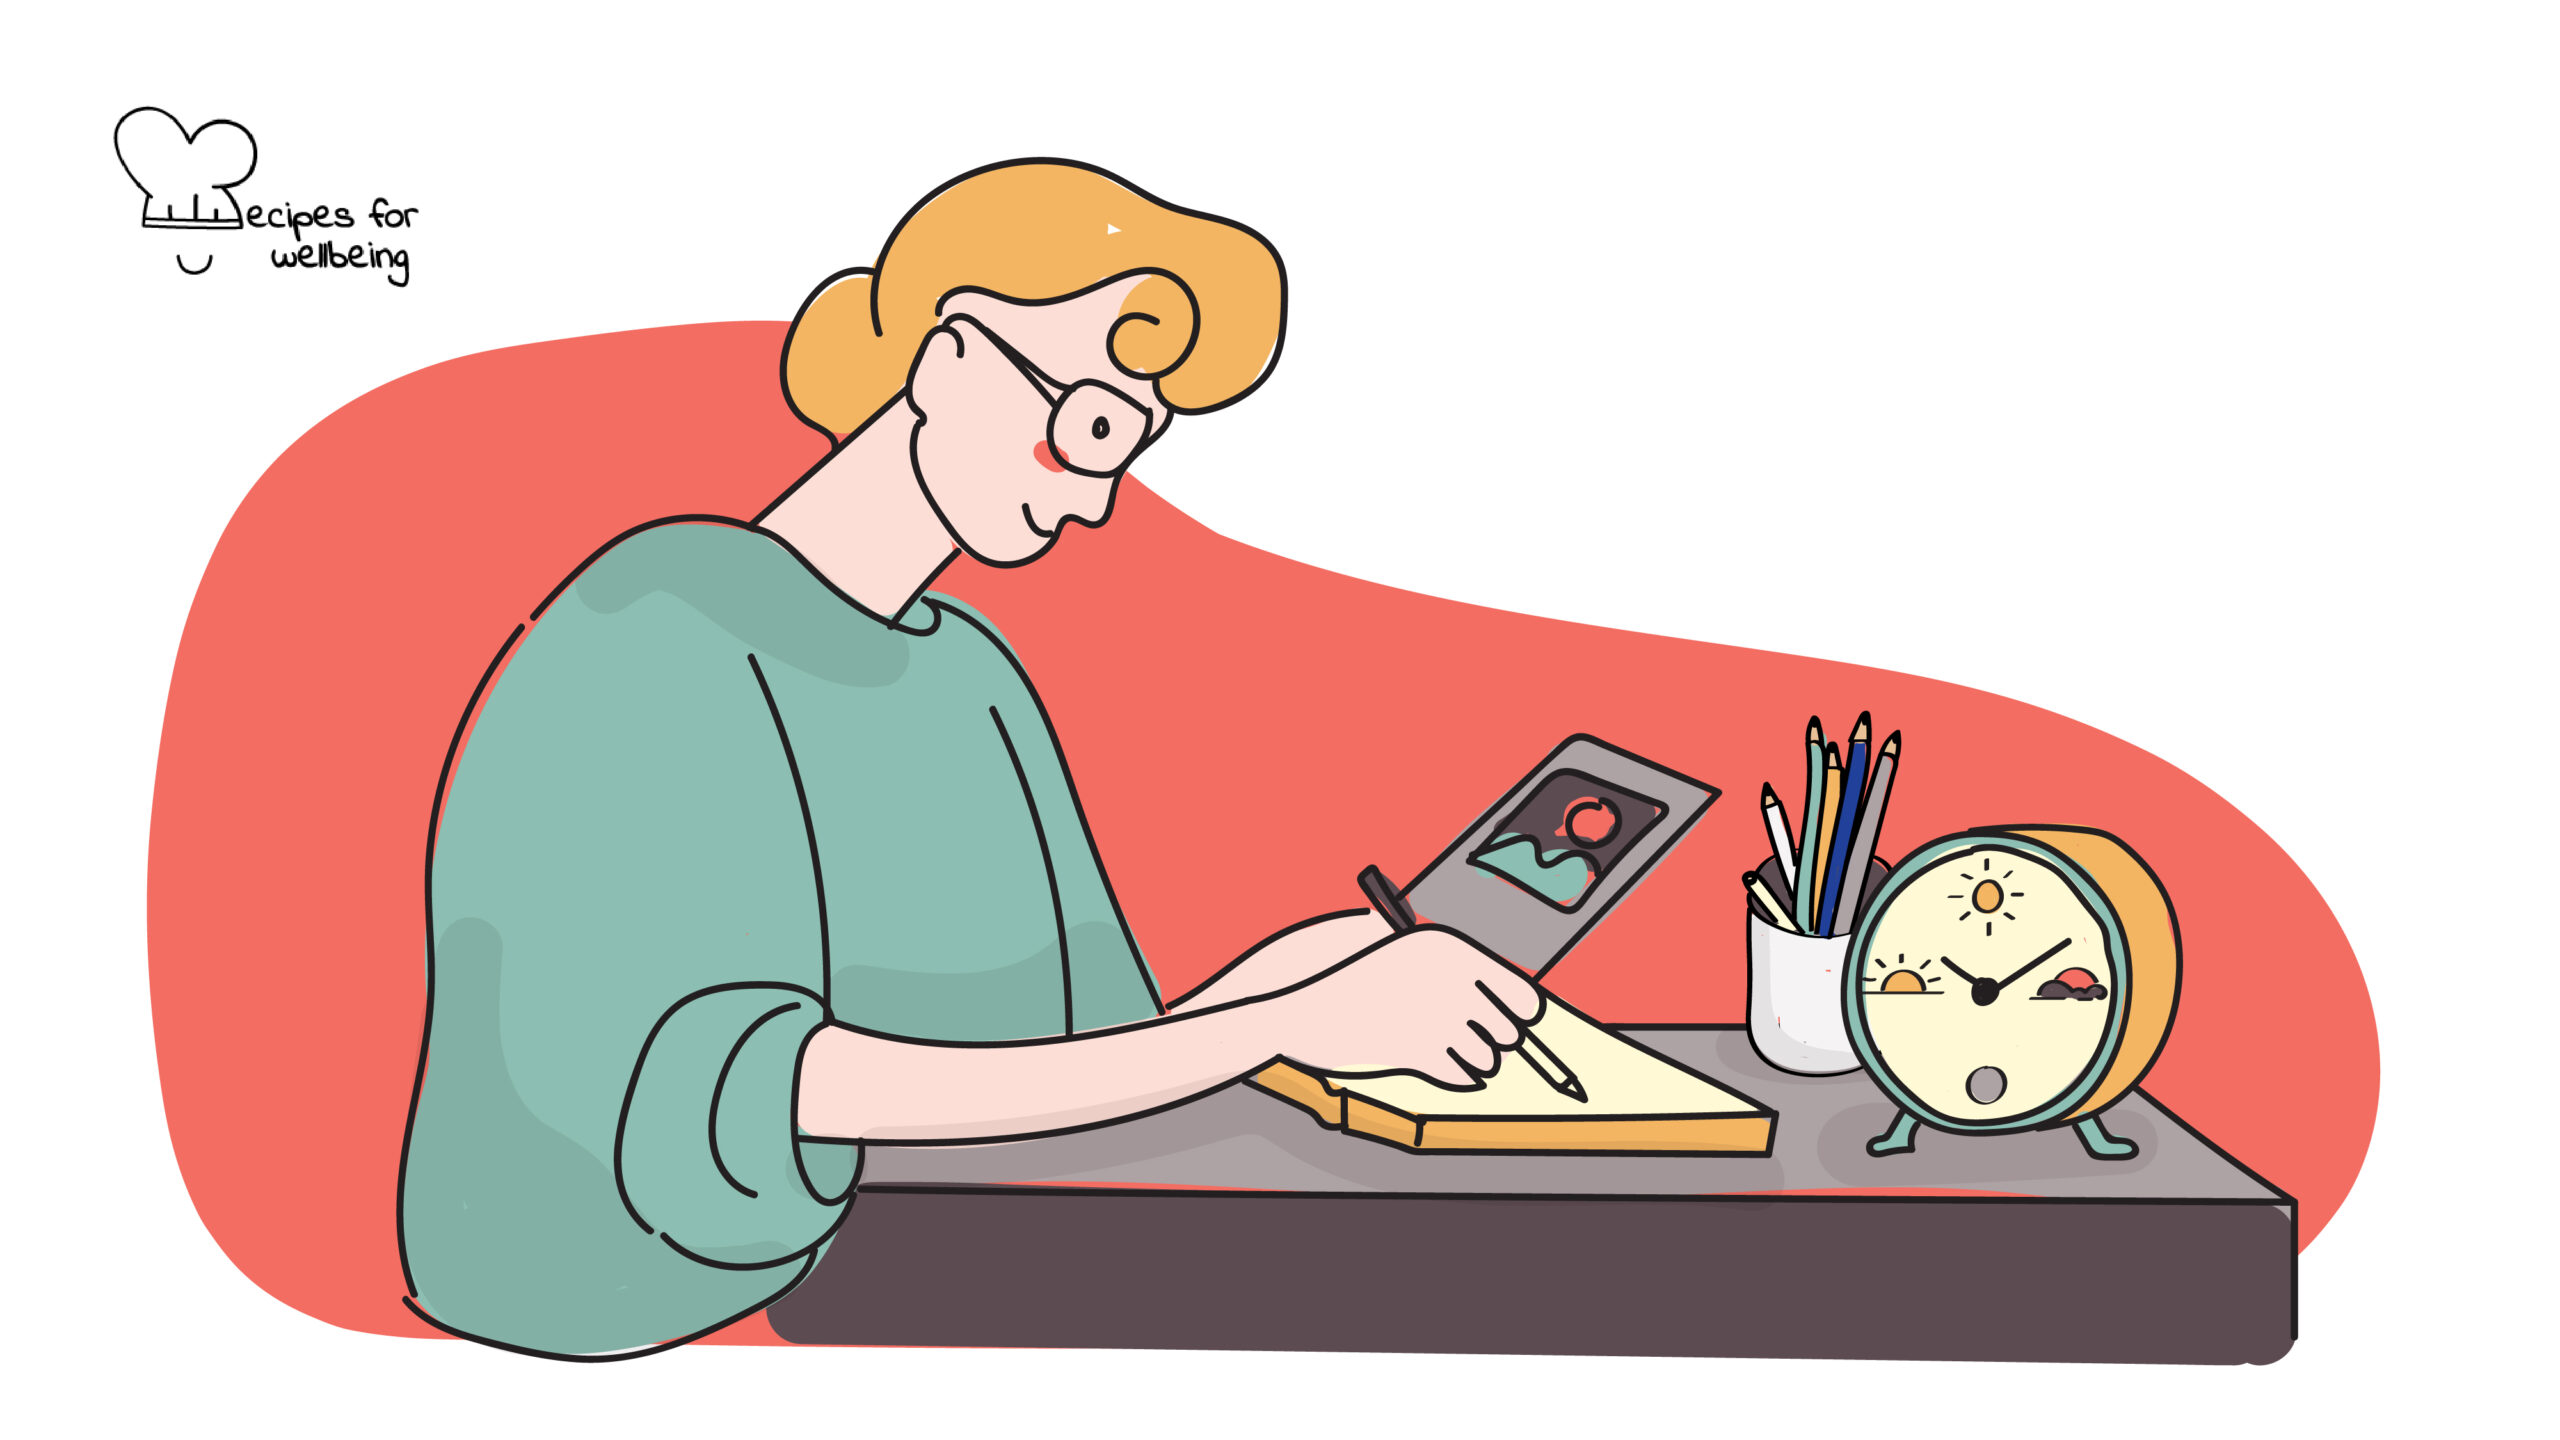 Illustration of a person writing on a journal. © Recipes for Wellbeing